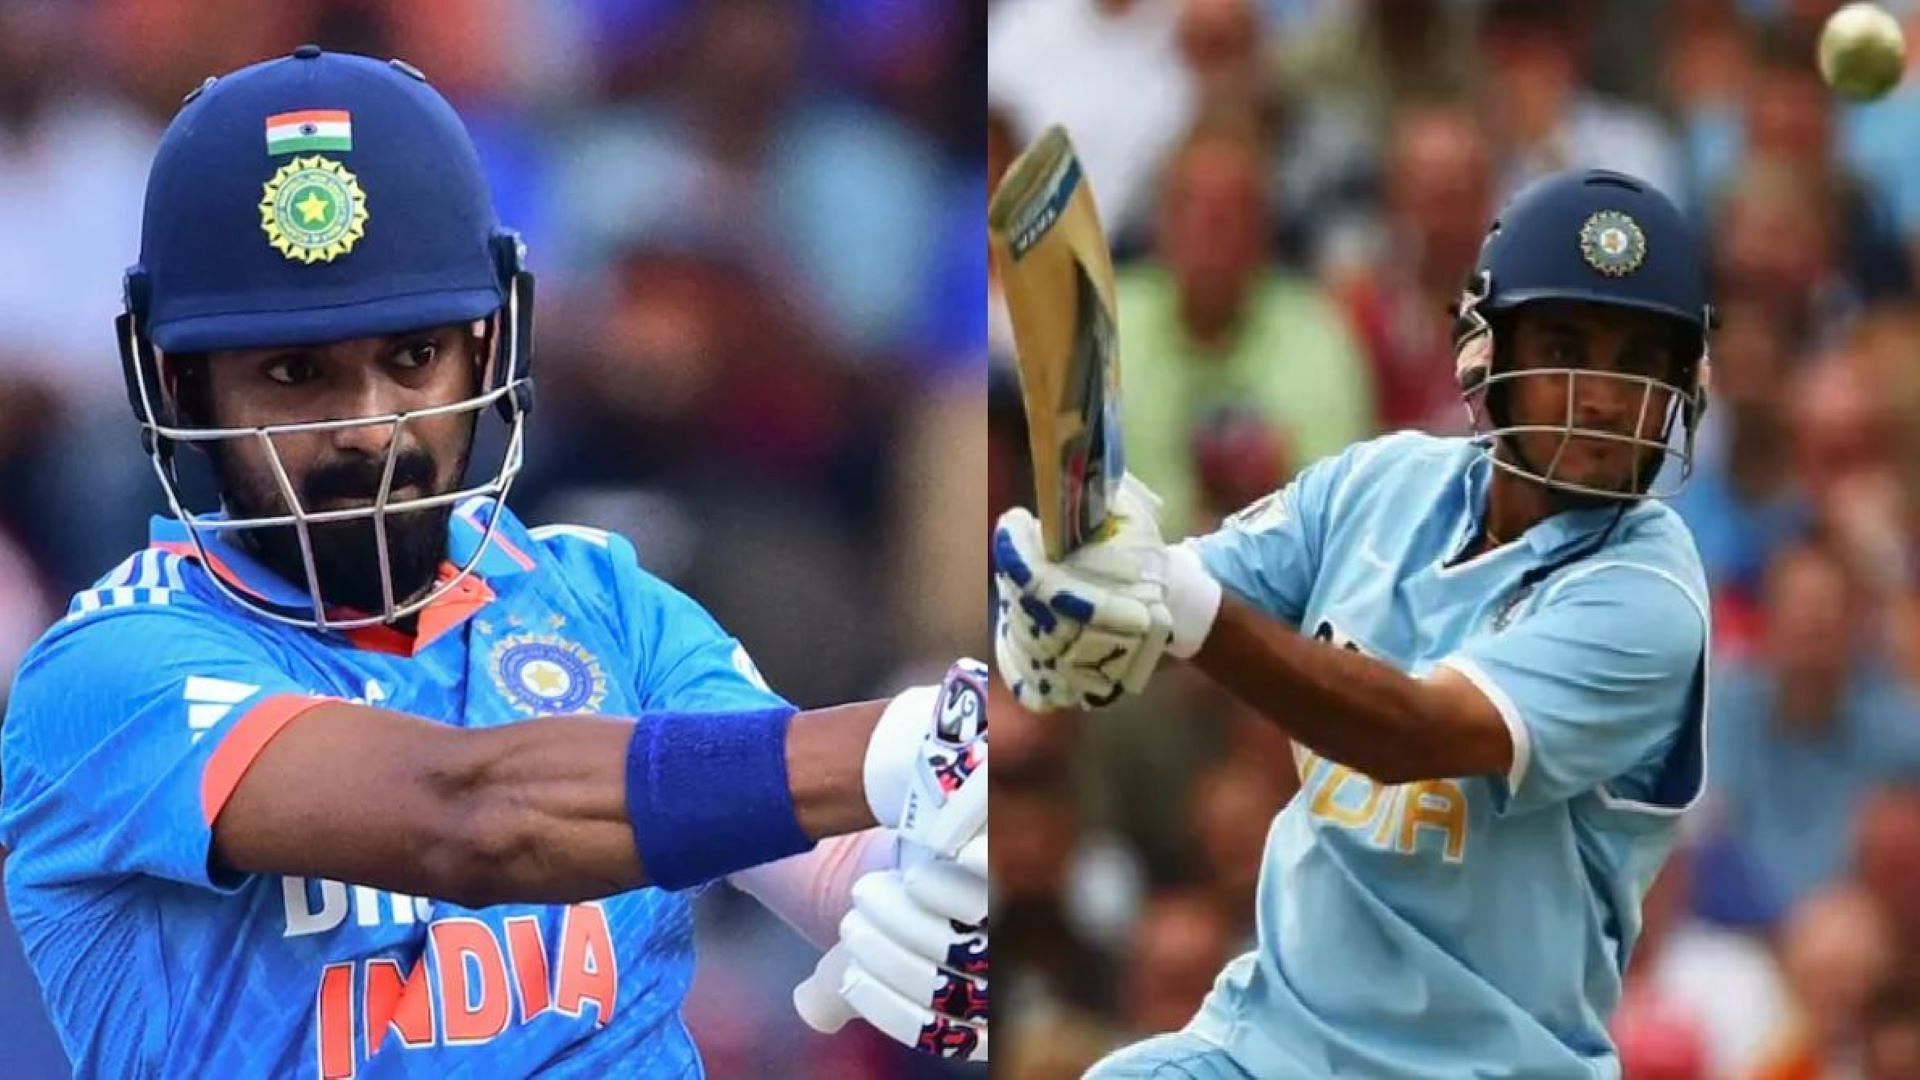 Several Indian batters have scored more than 2000 ODI runs